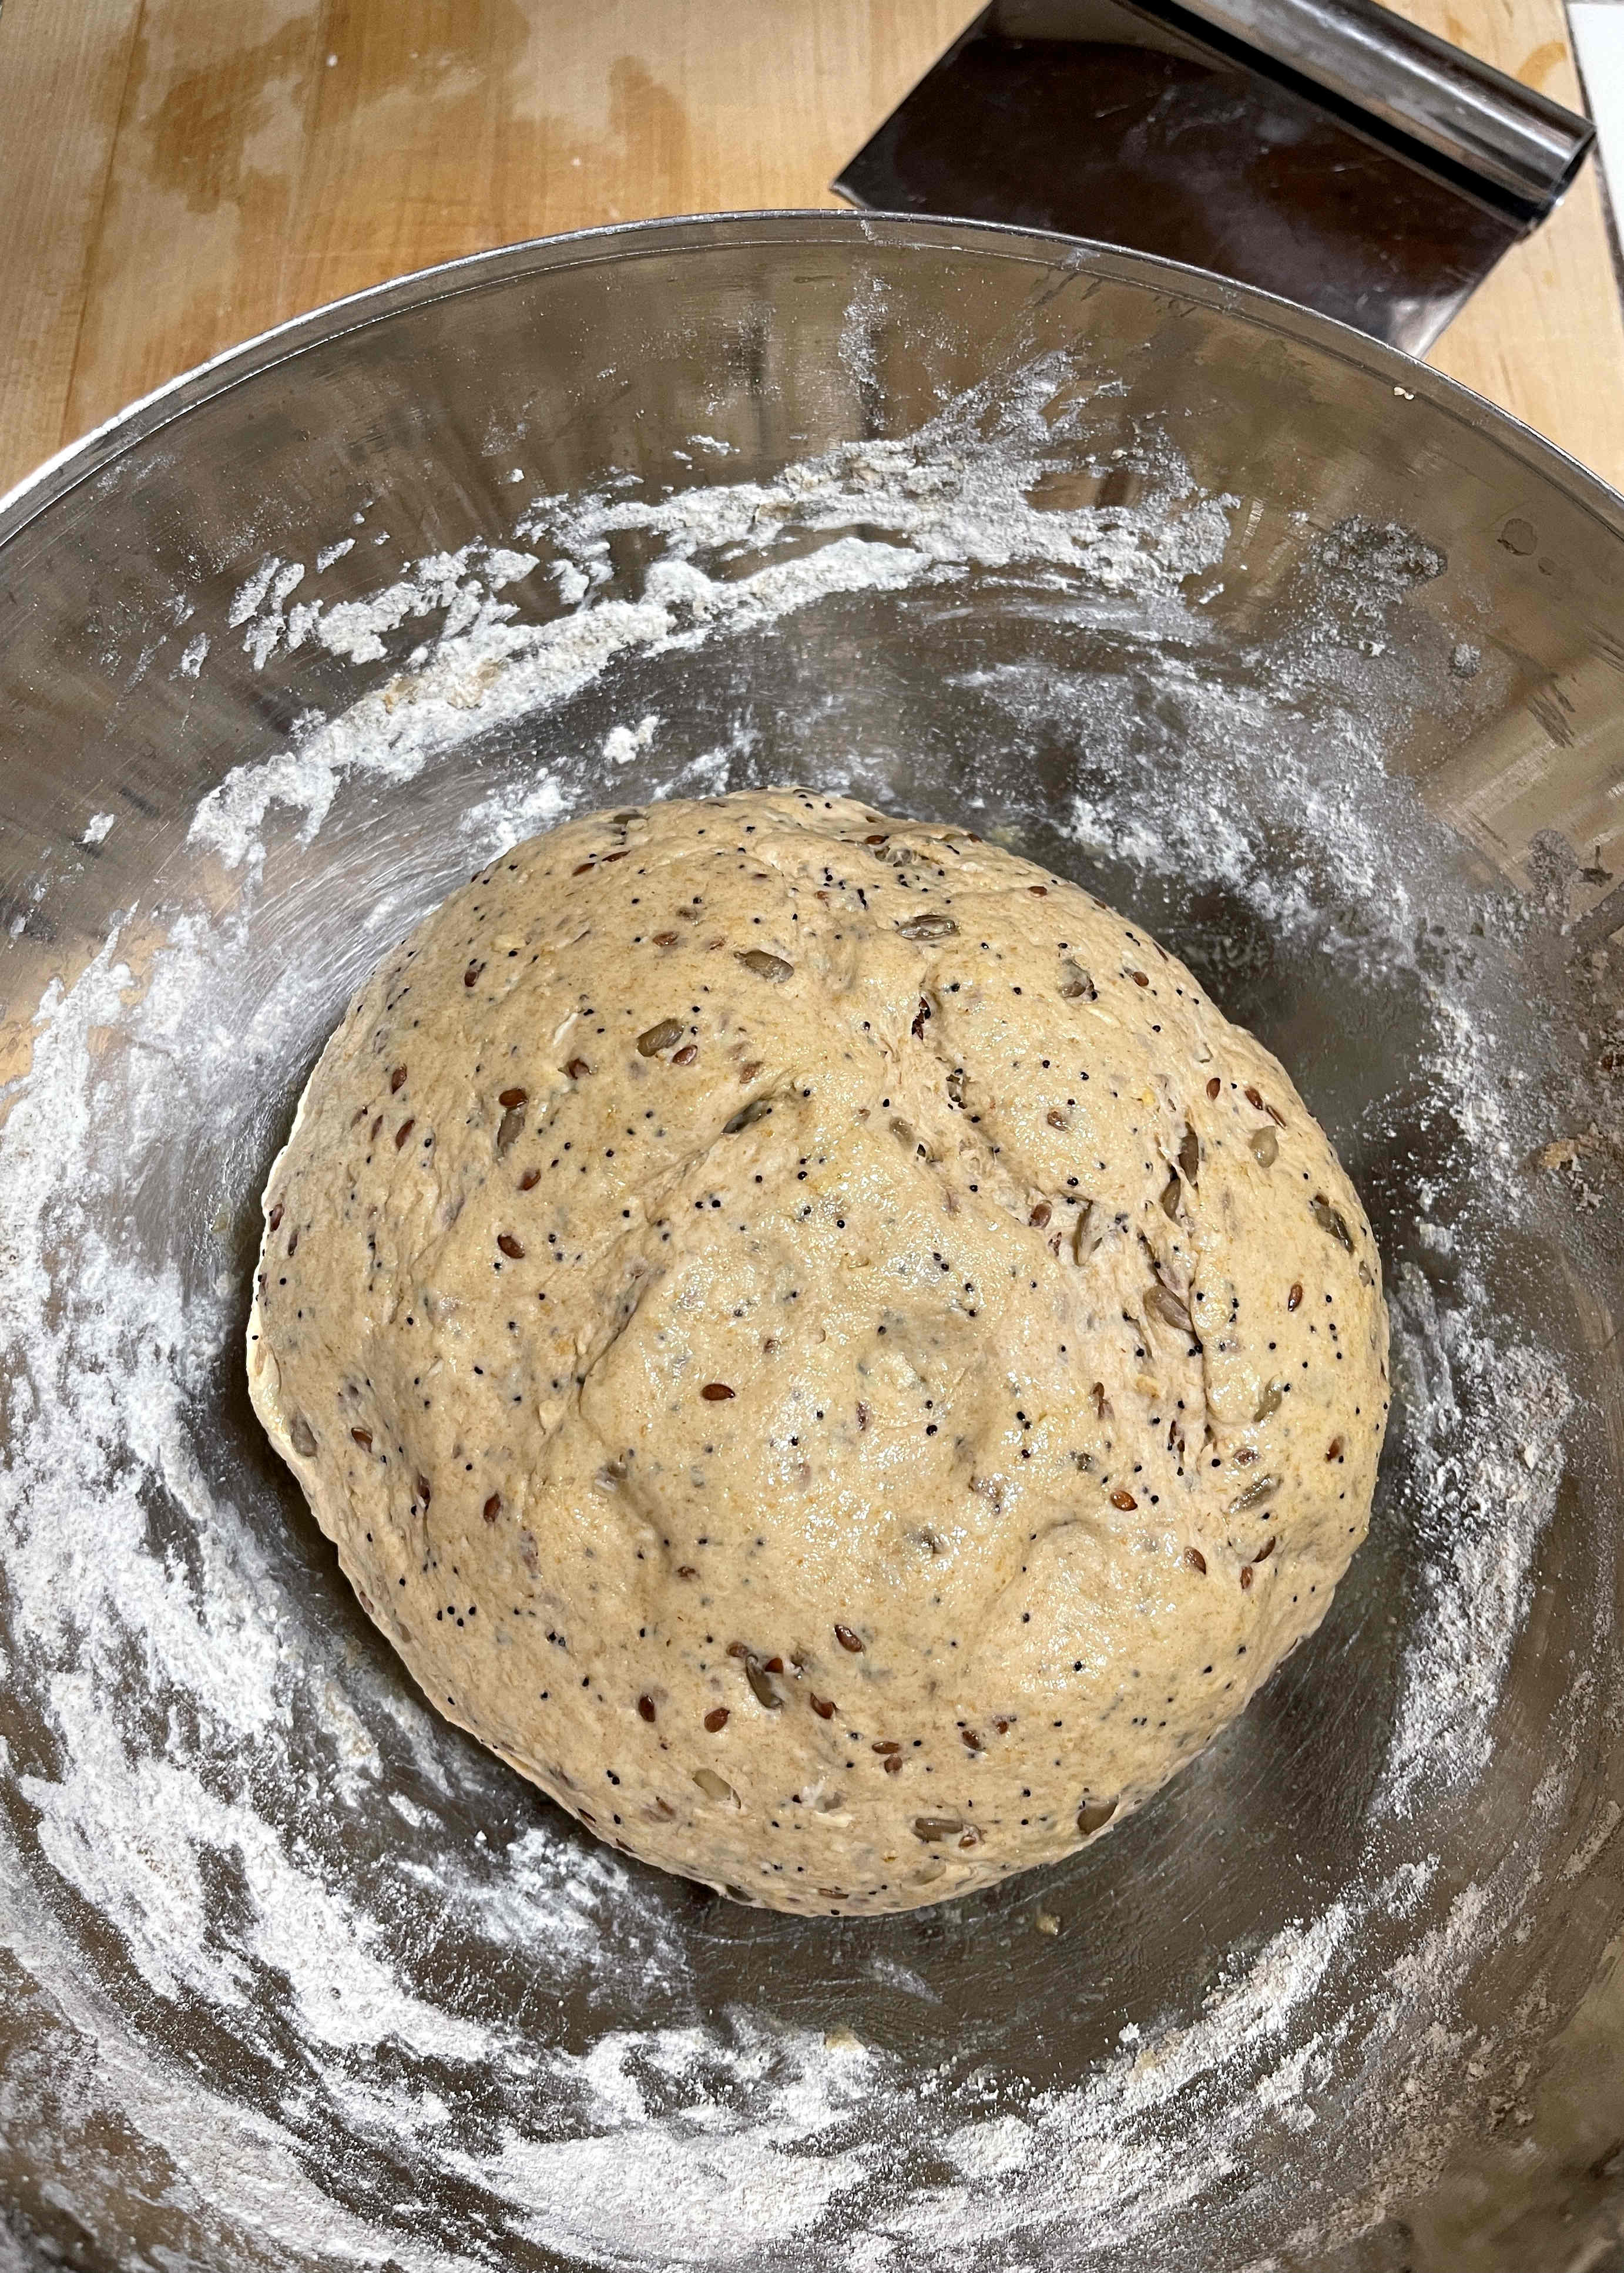 A ball of multigrain bread in a stainless steel bowl at the start of proofing. It hasn't risen at all yet.